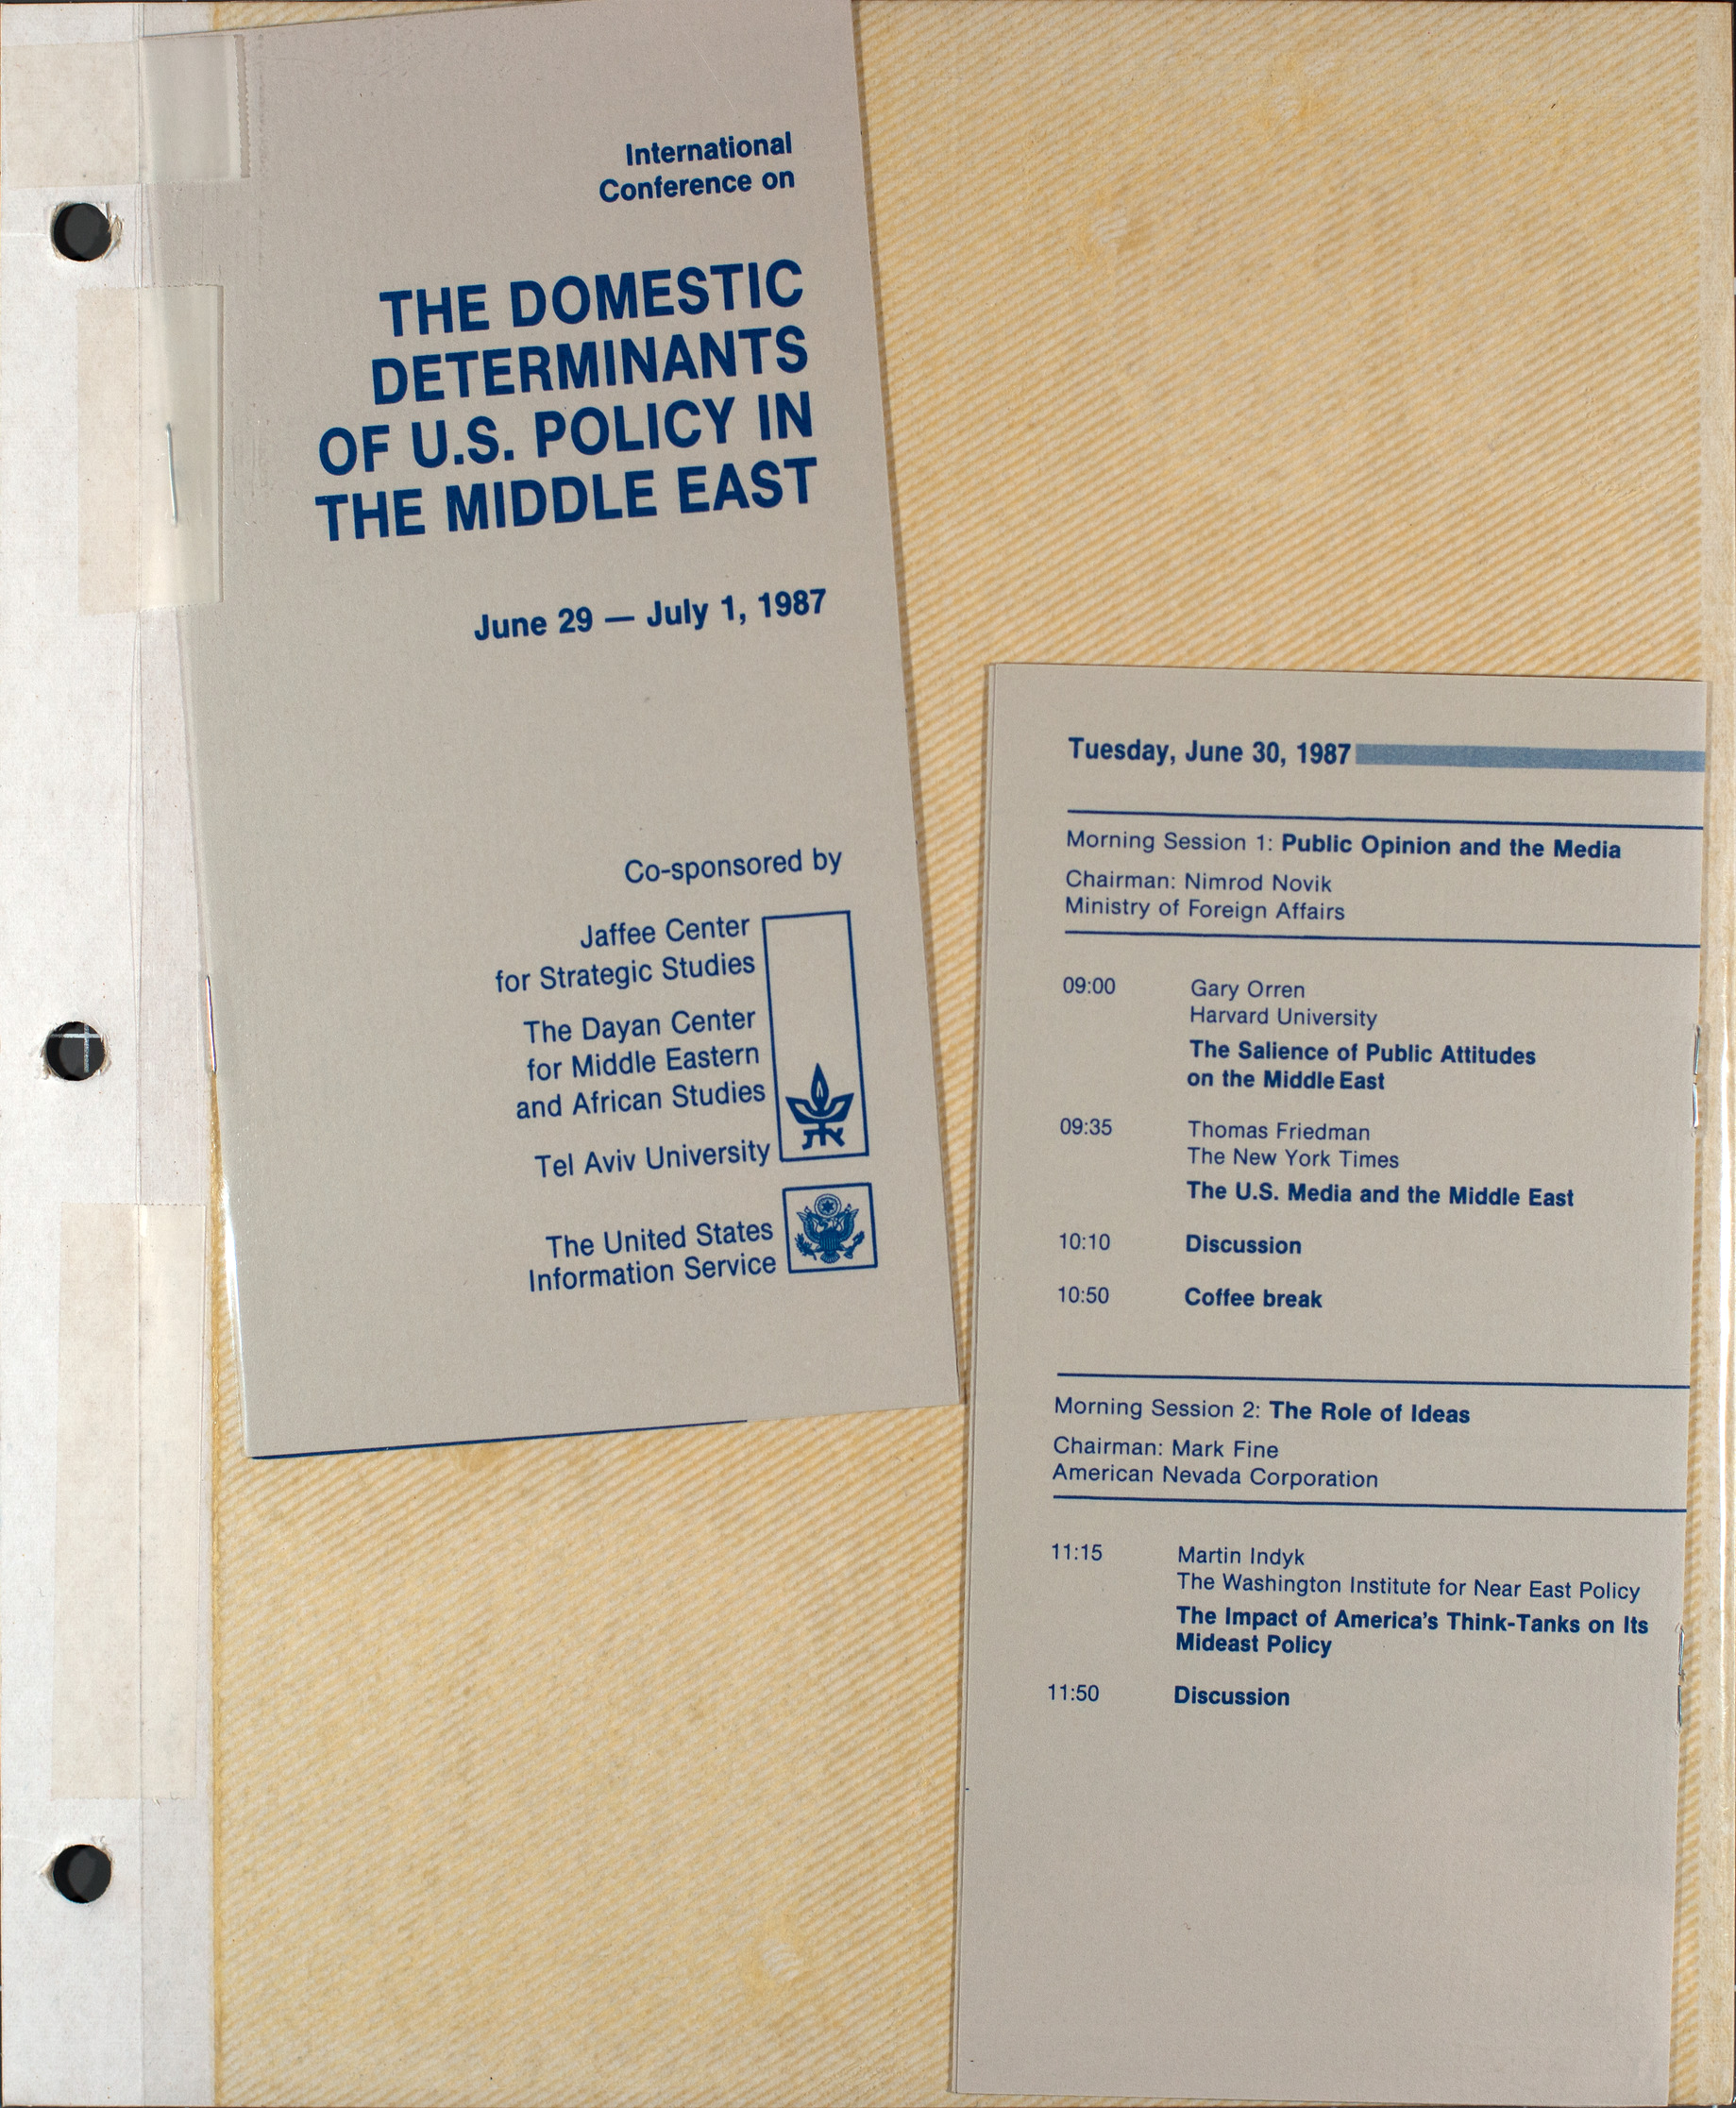 Conference program, The Domestic Determinants of U.S. Policy in the Middle East, June 29-July 1, 1987